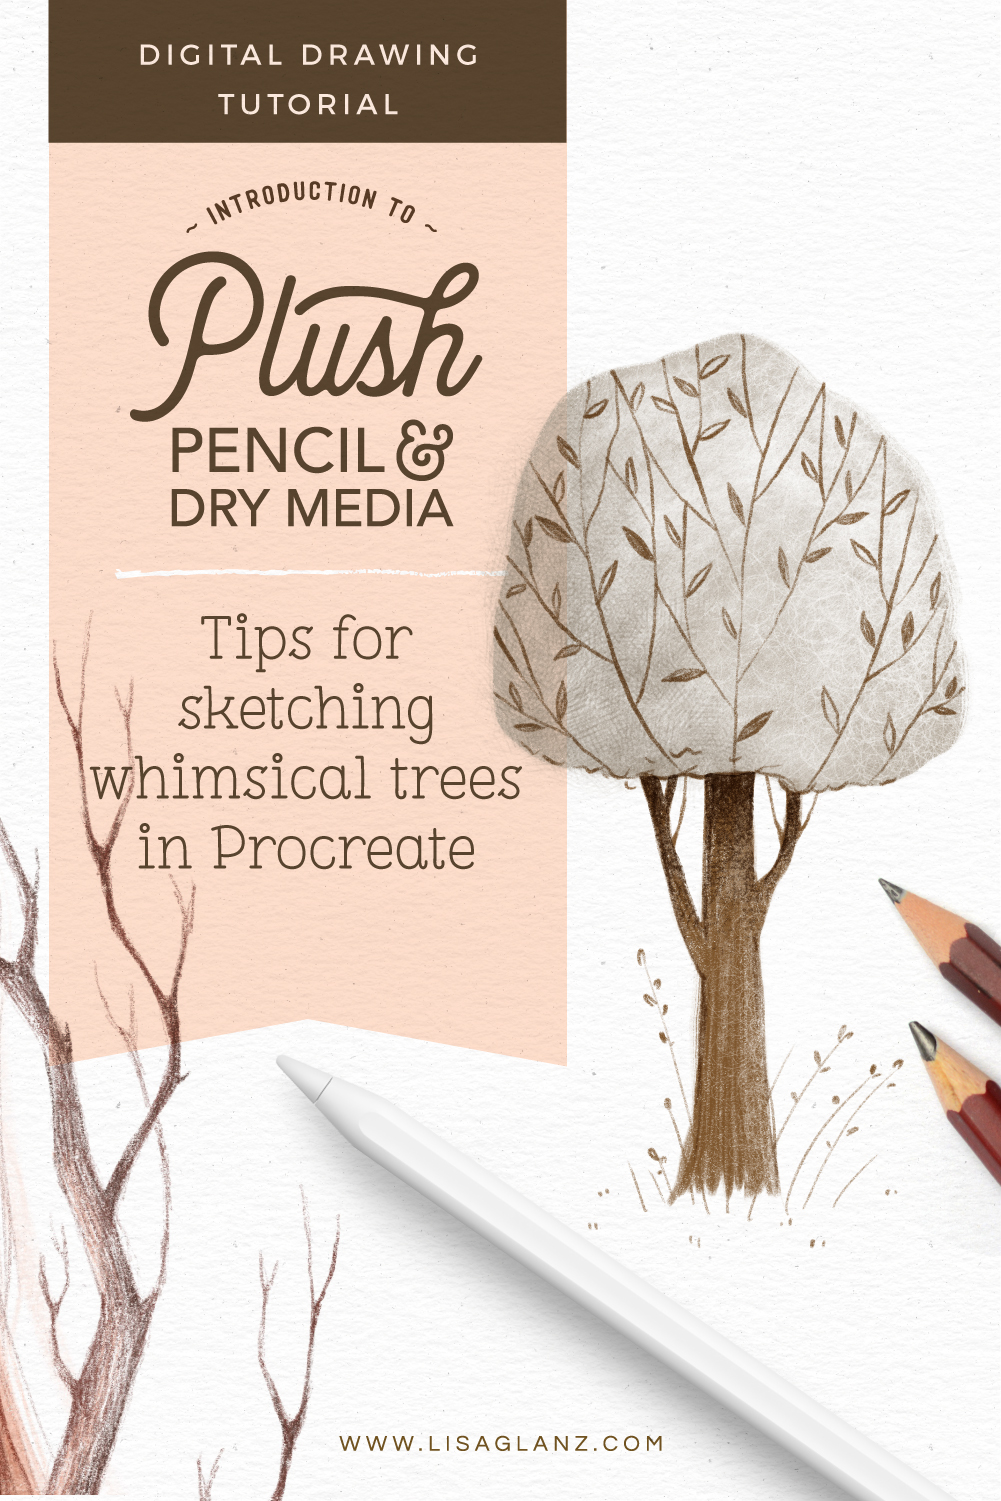 Digital drawing: Tips for sketching whimsical trees in Procreate